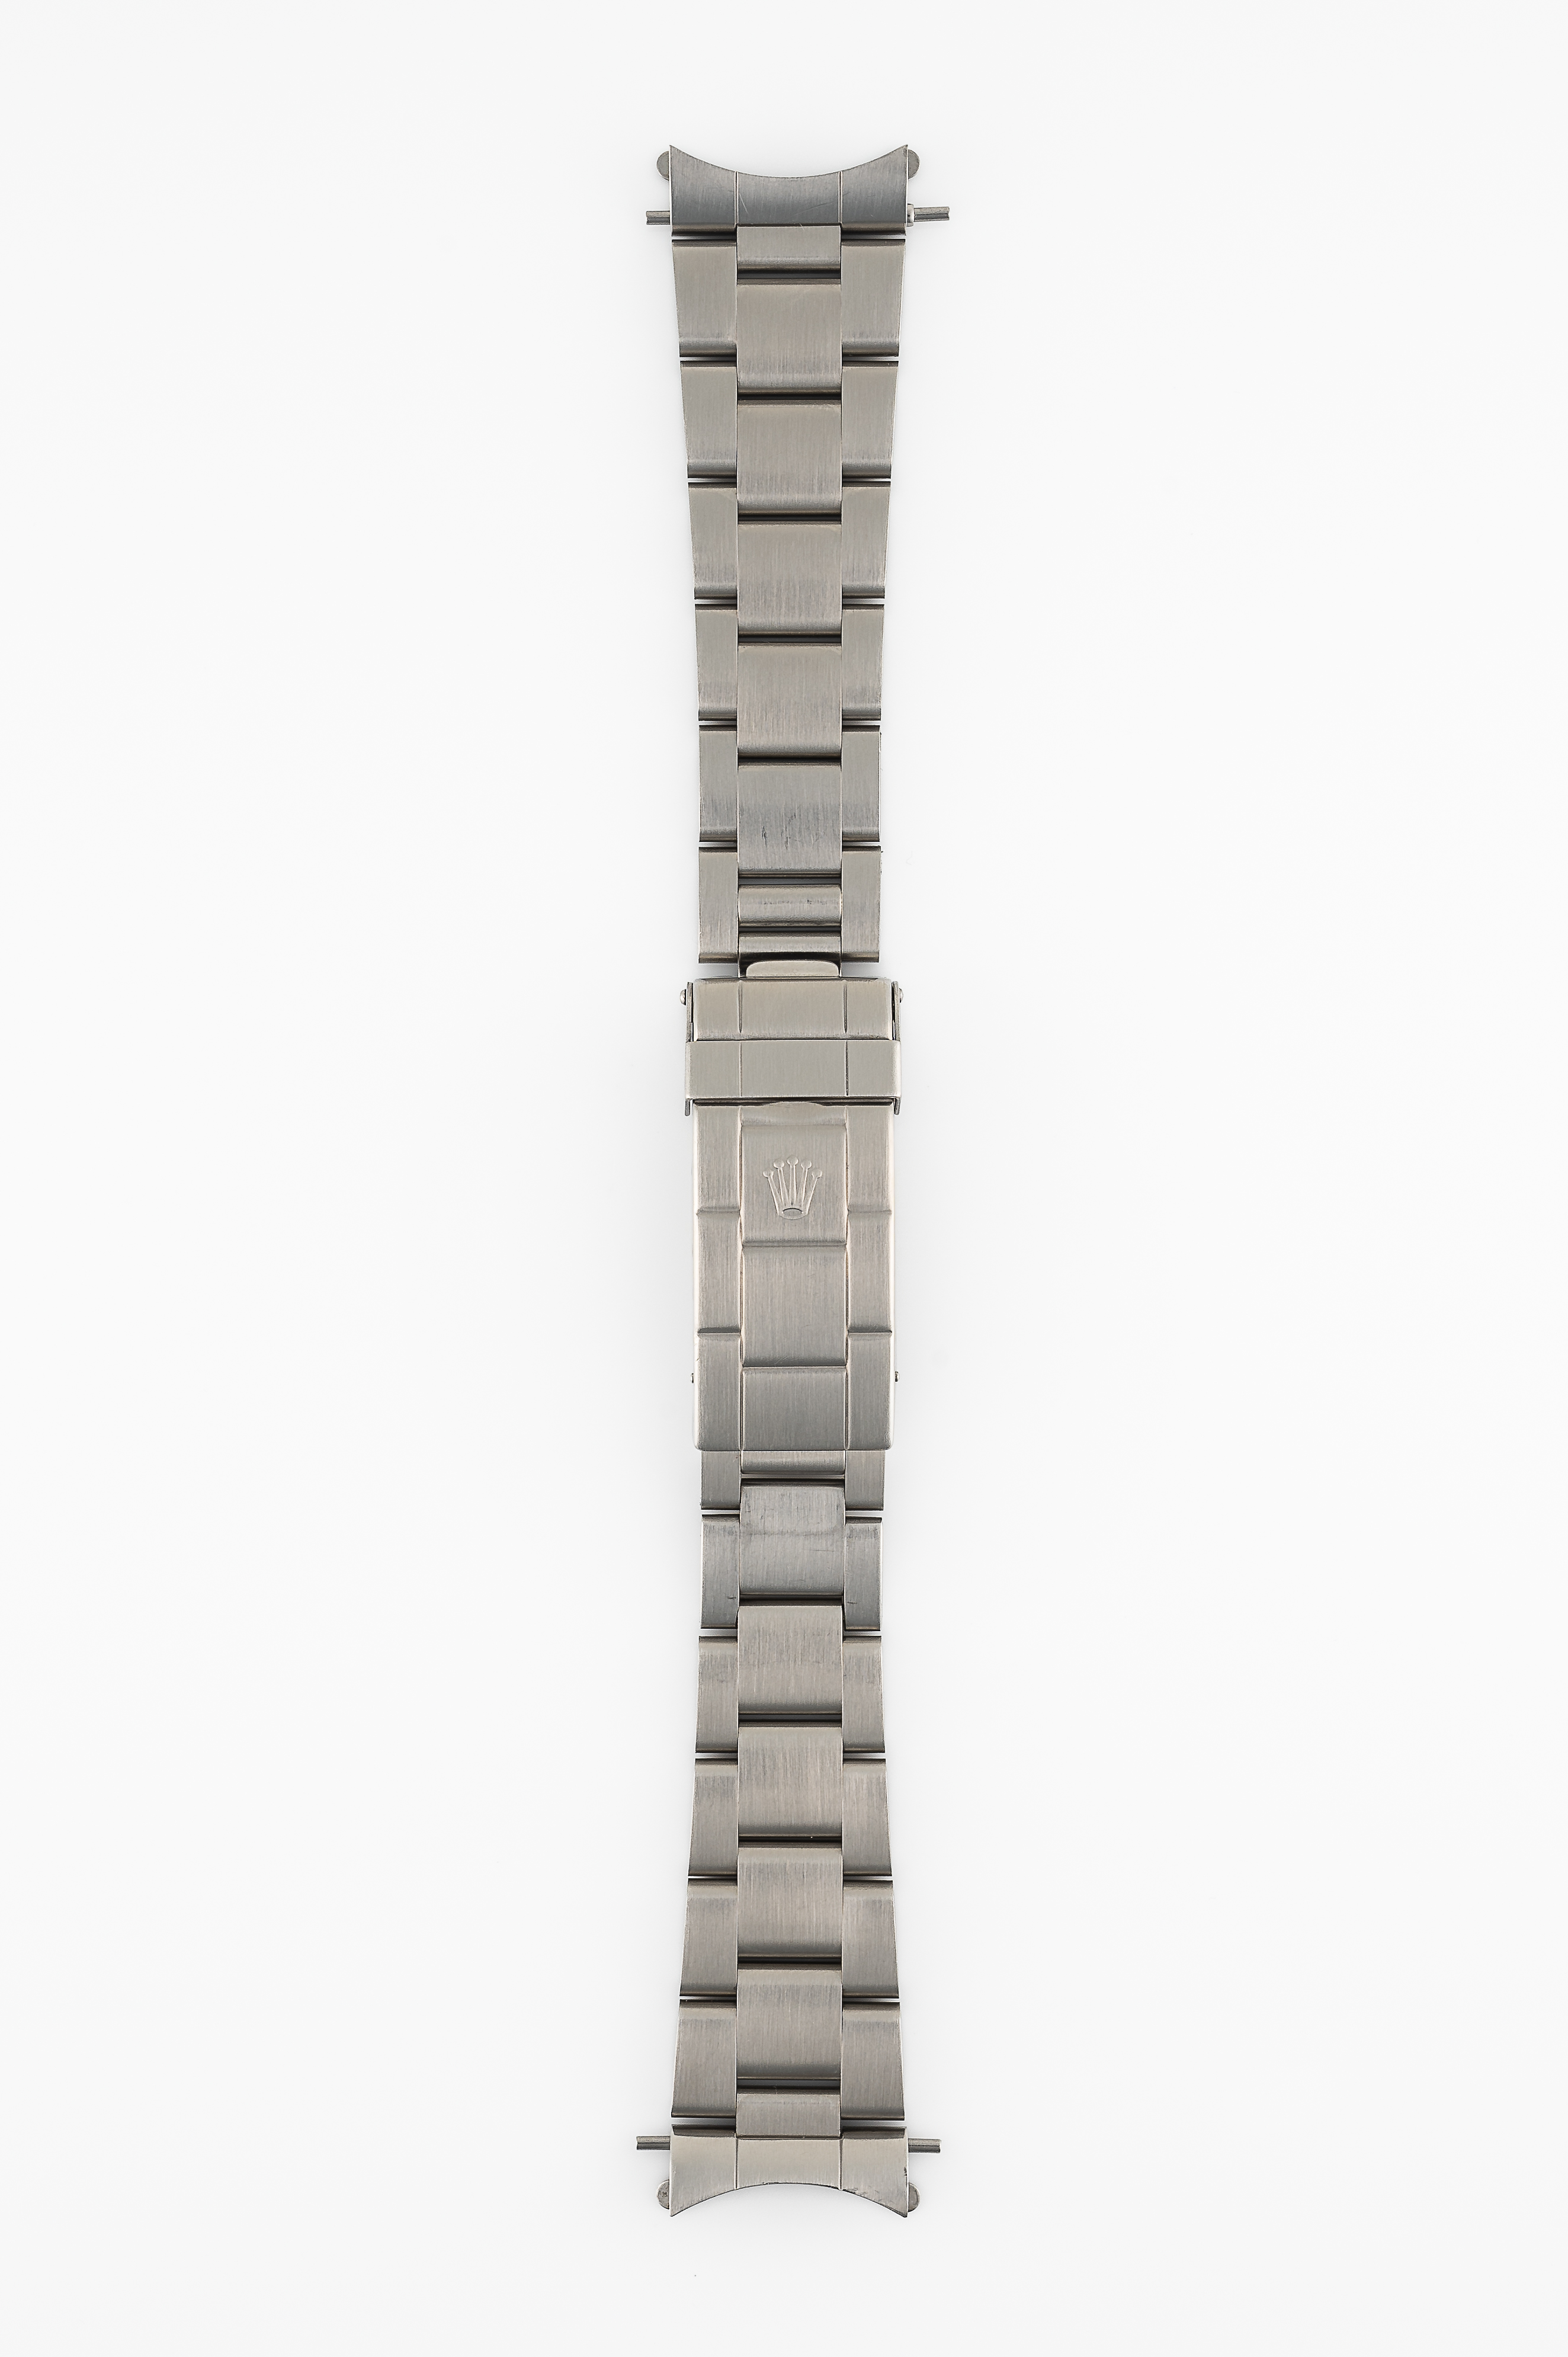 A STAINLESS STEEL 20MM ROLEX OYSTER SUBMARINER SERVICE BRACELET CIRCA 1991, REF. 93150 FOR